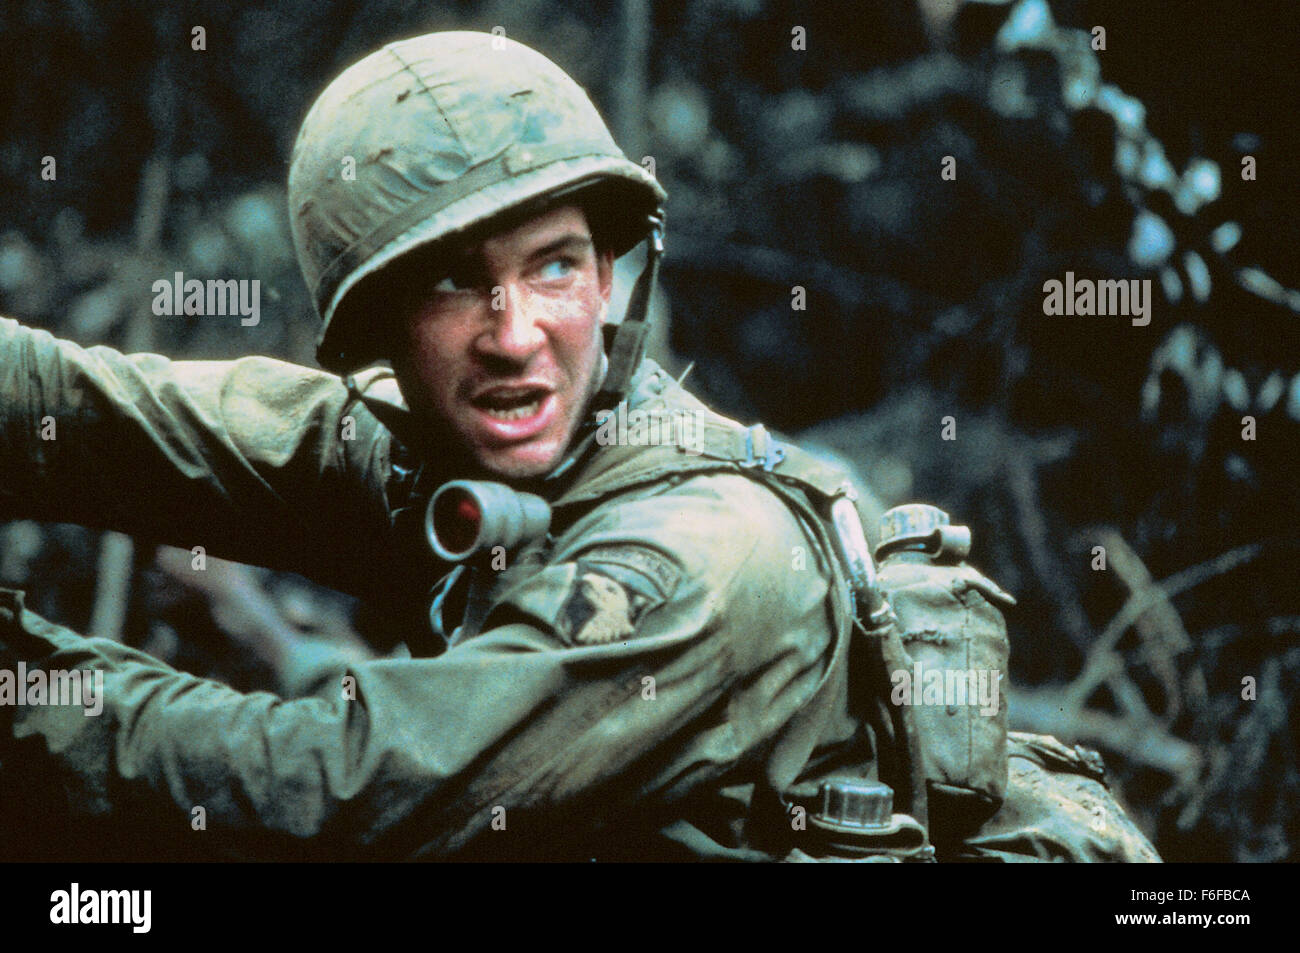 RELEASE DATE: August 28, 1987. MOVIE TITLE: Hamburger Hill. STUDIO: RKO Pictures. PLOT: A brutal and realistic war film focuses on the lives of a squad of 14 U.S. Army soldiers of B Company, 3rd Battalion, 187th Infanty Regiment, 101st Airborne Division during the brutal 10 day (May 11-20, 1969) battle for Hill 937 in the A Shau Valley of Vietnam as they try again and again to take the fortified hill held by the North Vietnamese, and the faults and casualties they take every time in which the battle was later dubbedHamburger Hill because enemy fire was so fierce that the fusillade of bullet Stock Photo